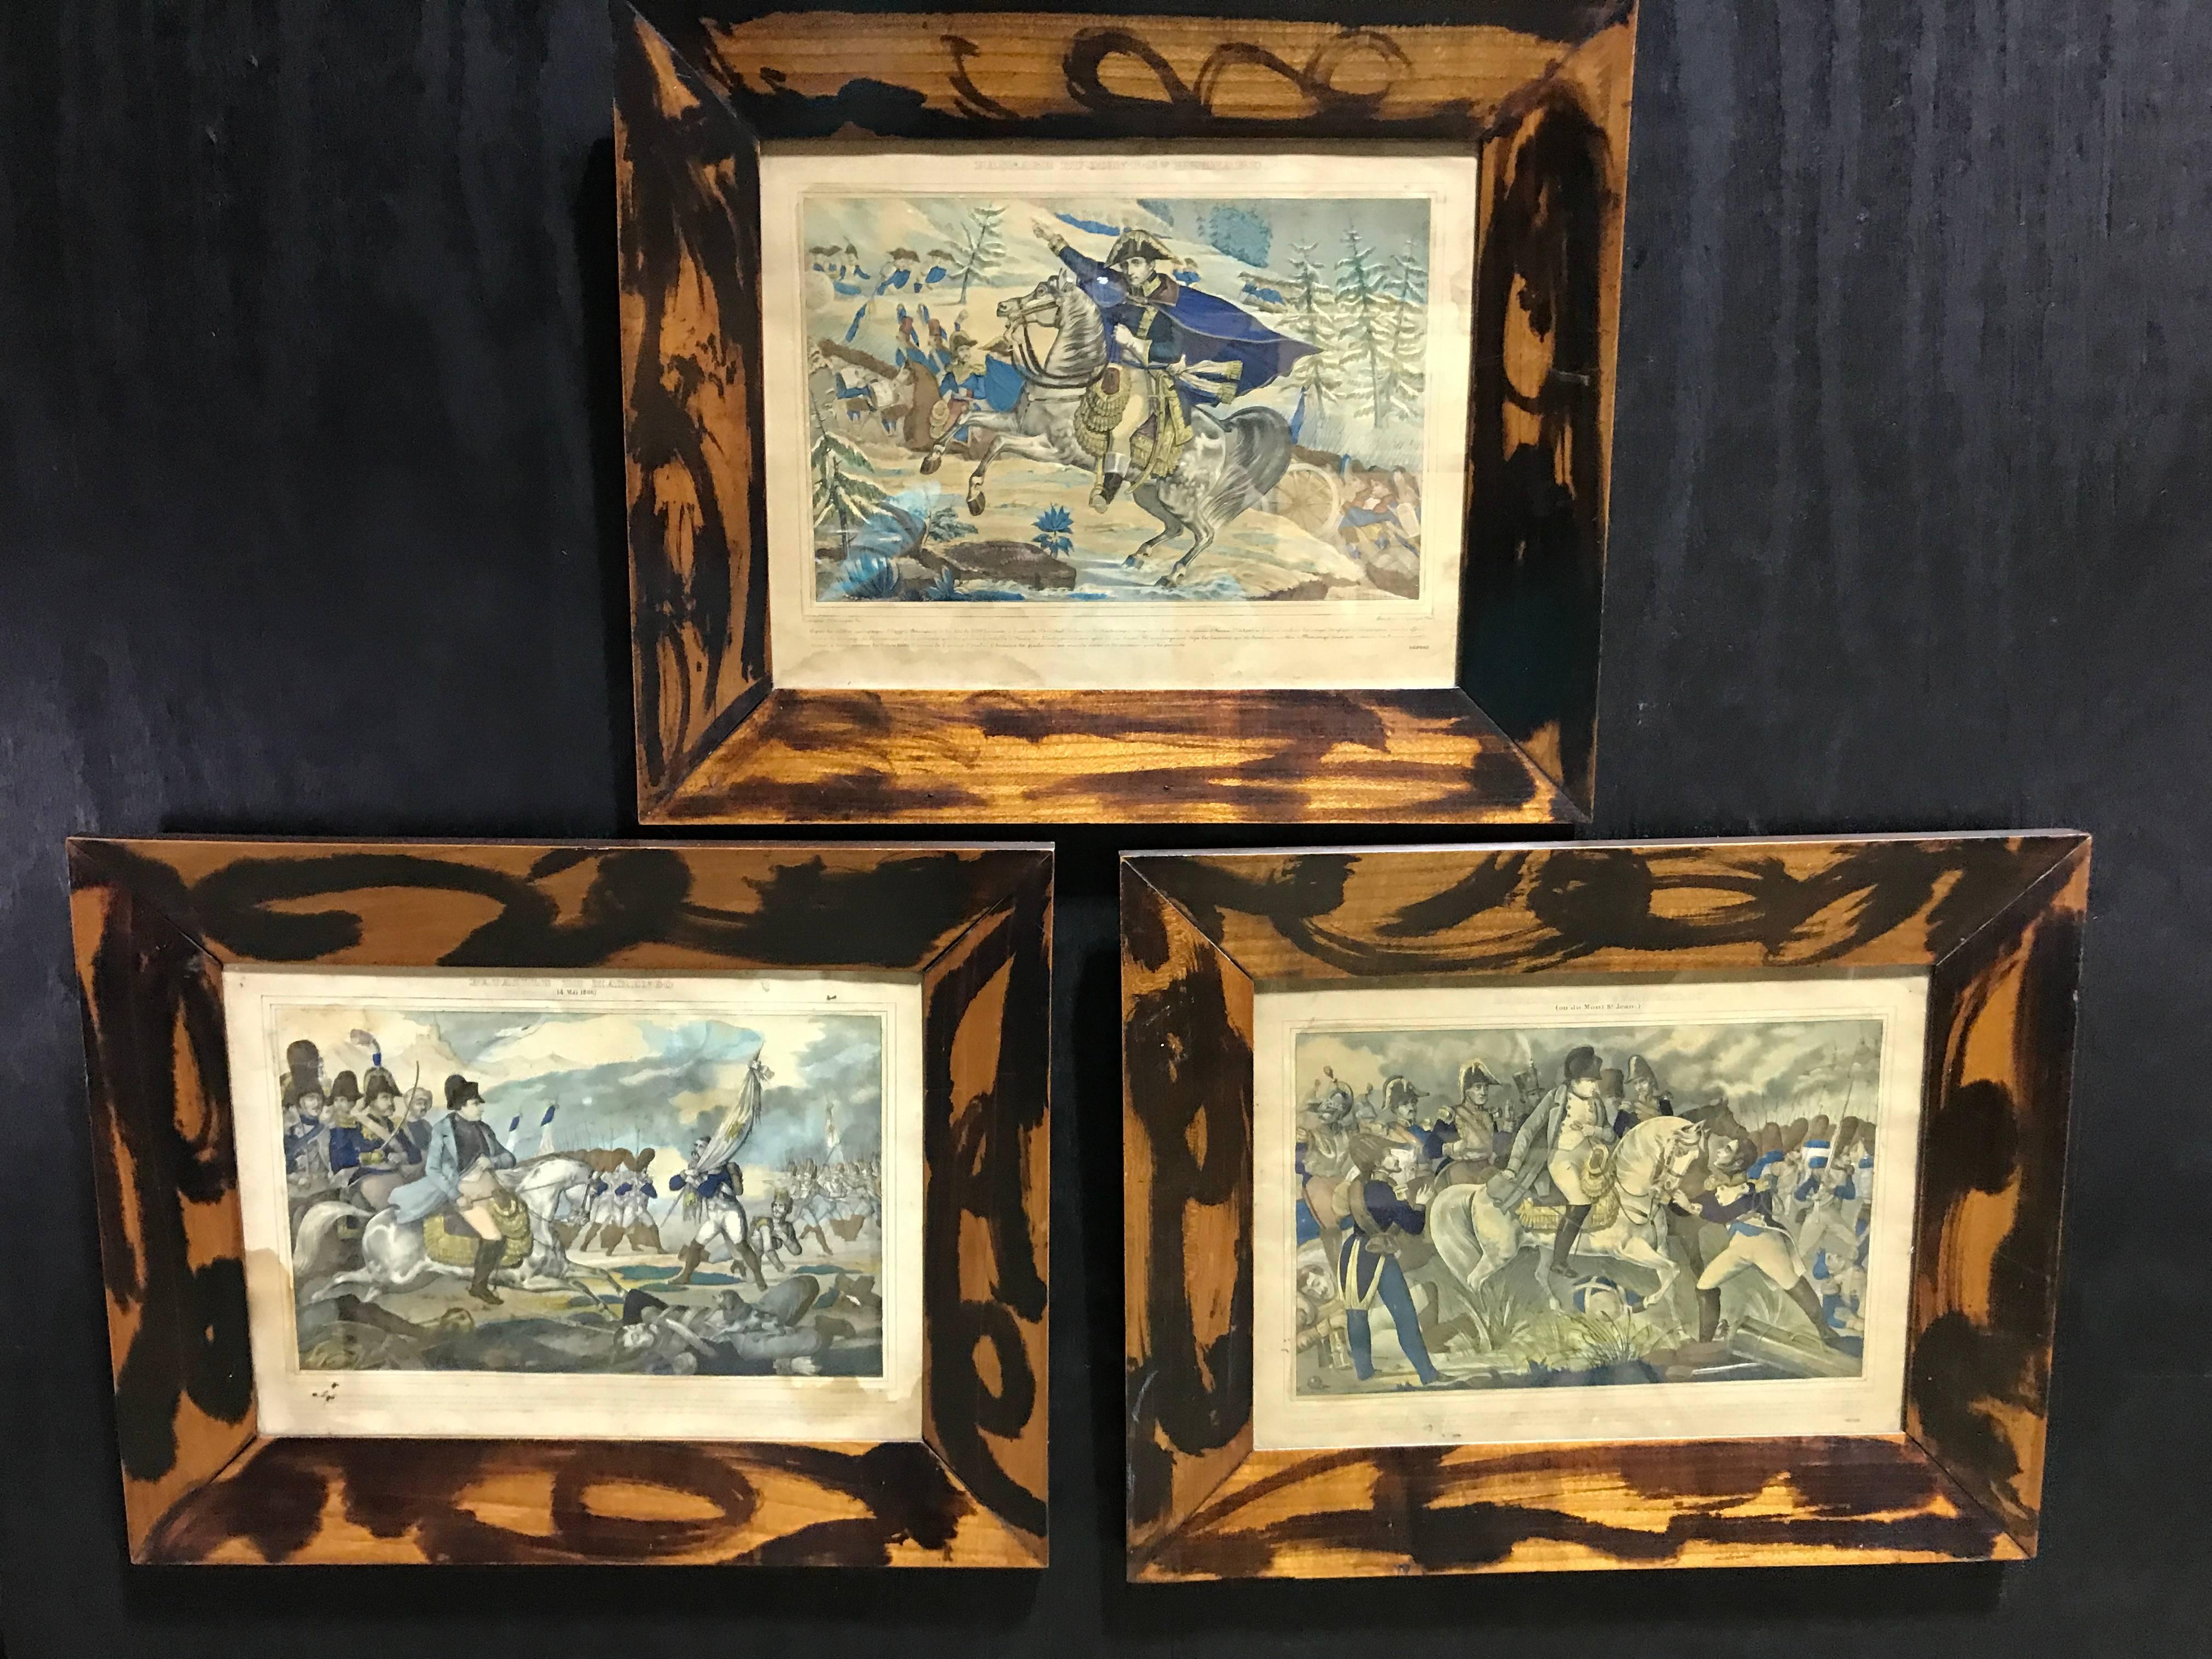 Three antique Napoleon war scene hand-colored prints, each one a different hand colored print of Napoleonic Battle Scenes, in superb faux painted tortoise antique frames, bearing Lockson import labels. Fresh from a Palm Beach Estate
Print 14